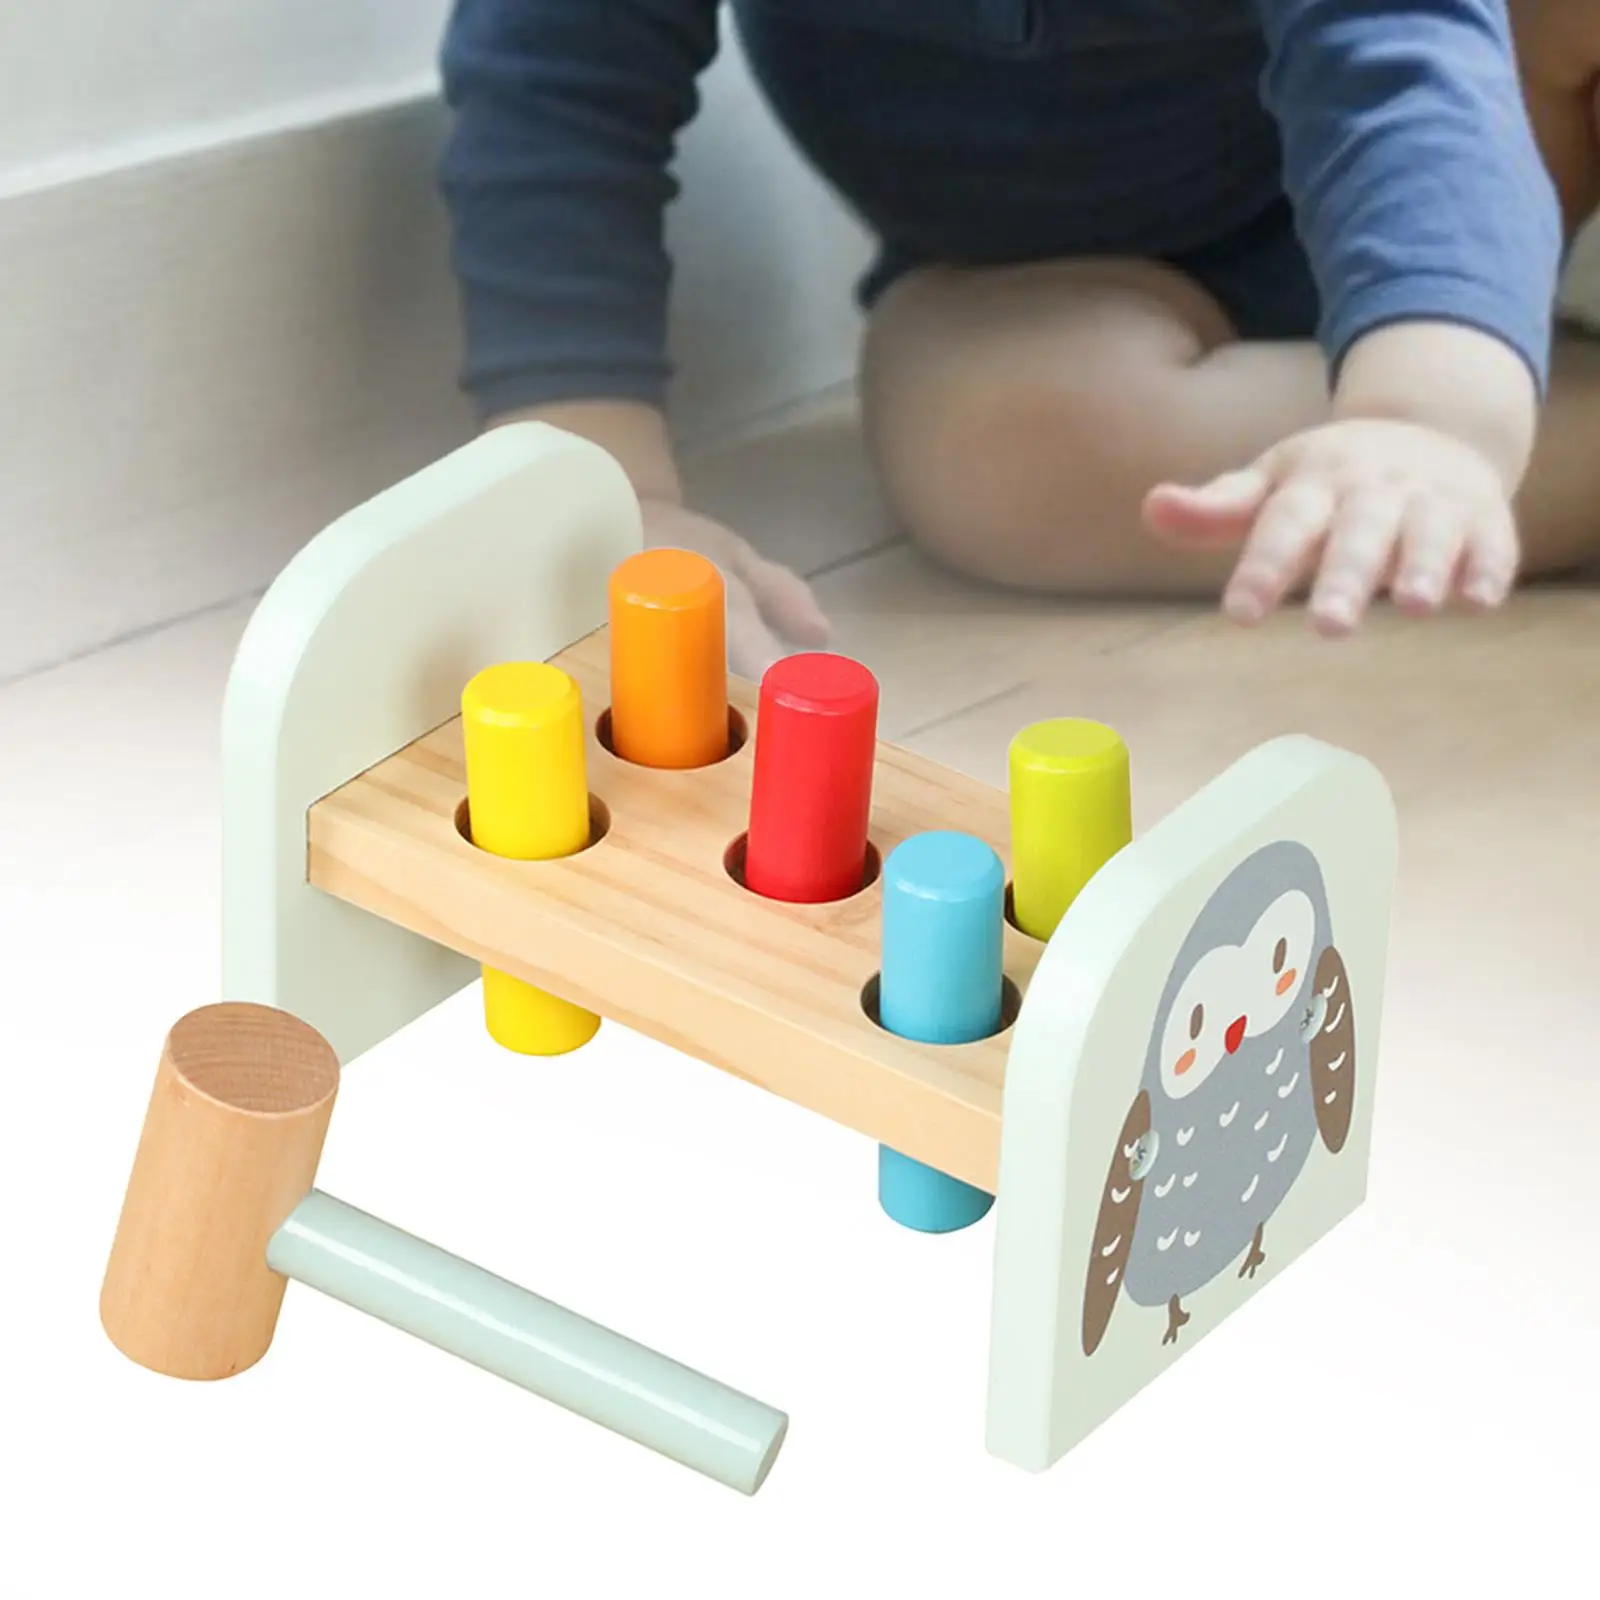 

Pounding Bench Wood Toy Hand Eye Coordination with Mallet Wooden Hammer Toy Wooden Pounding Toy for Kids Preschool Birthday Gift